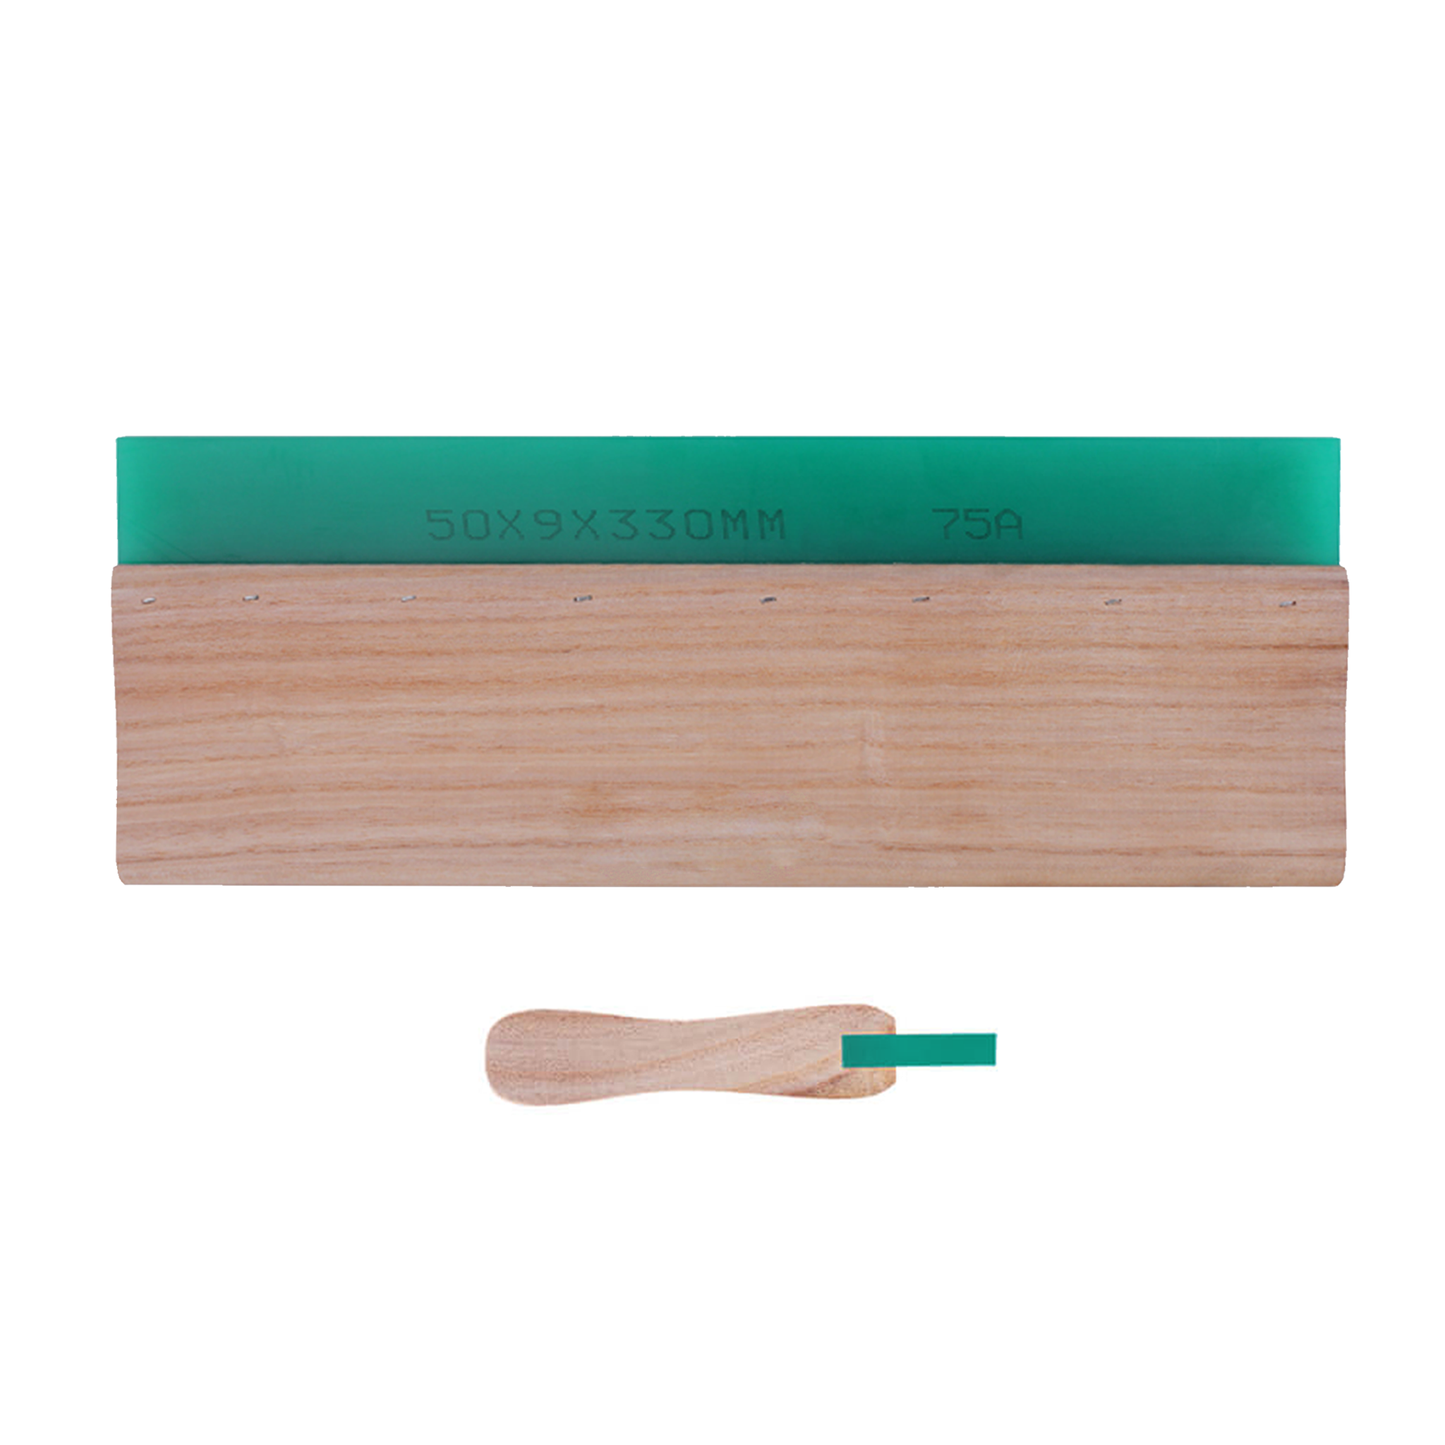 New Squeegee Wooden Handle